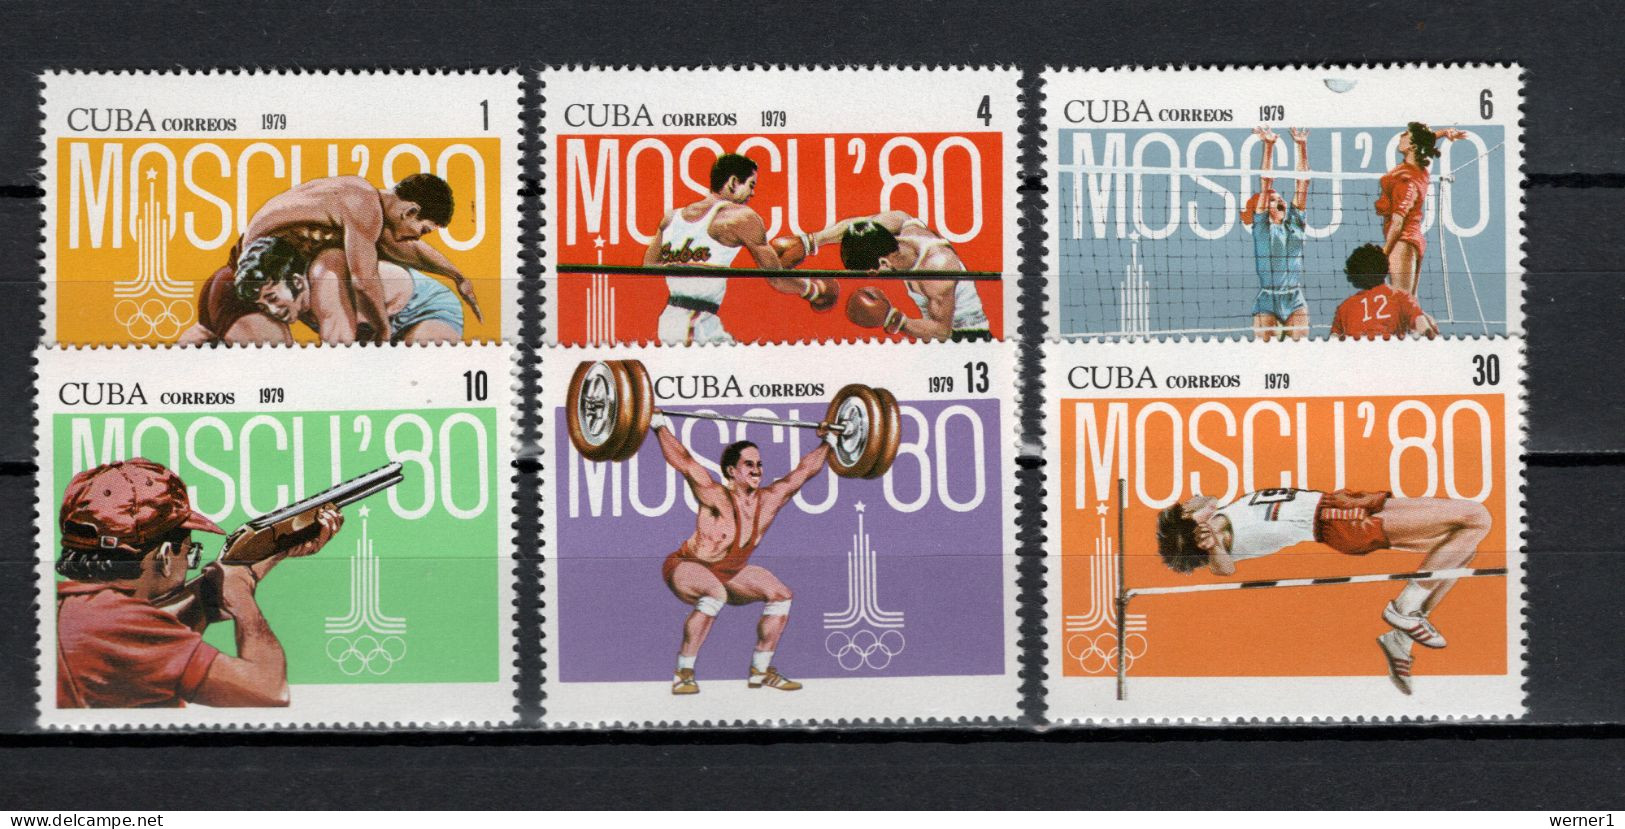 Cuba 1979 Olympic Games Moscow, Wrestling, Boxing, Volleyball, Shooting Etc. Set Of 6 MNH - Ete 1980: Moscou